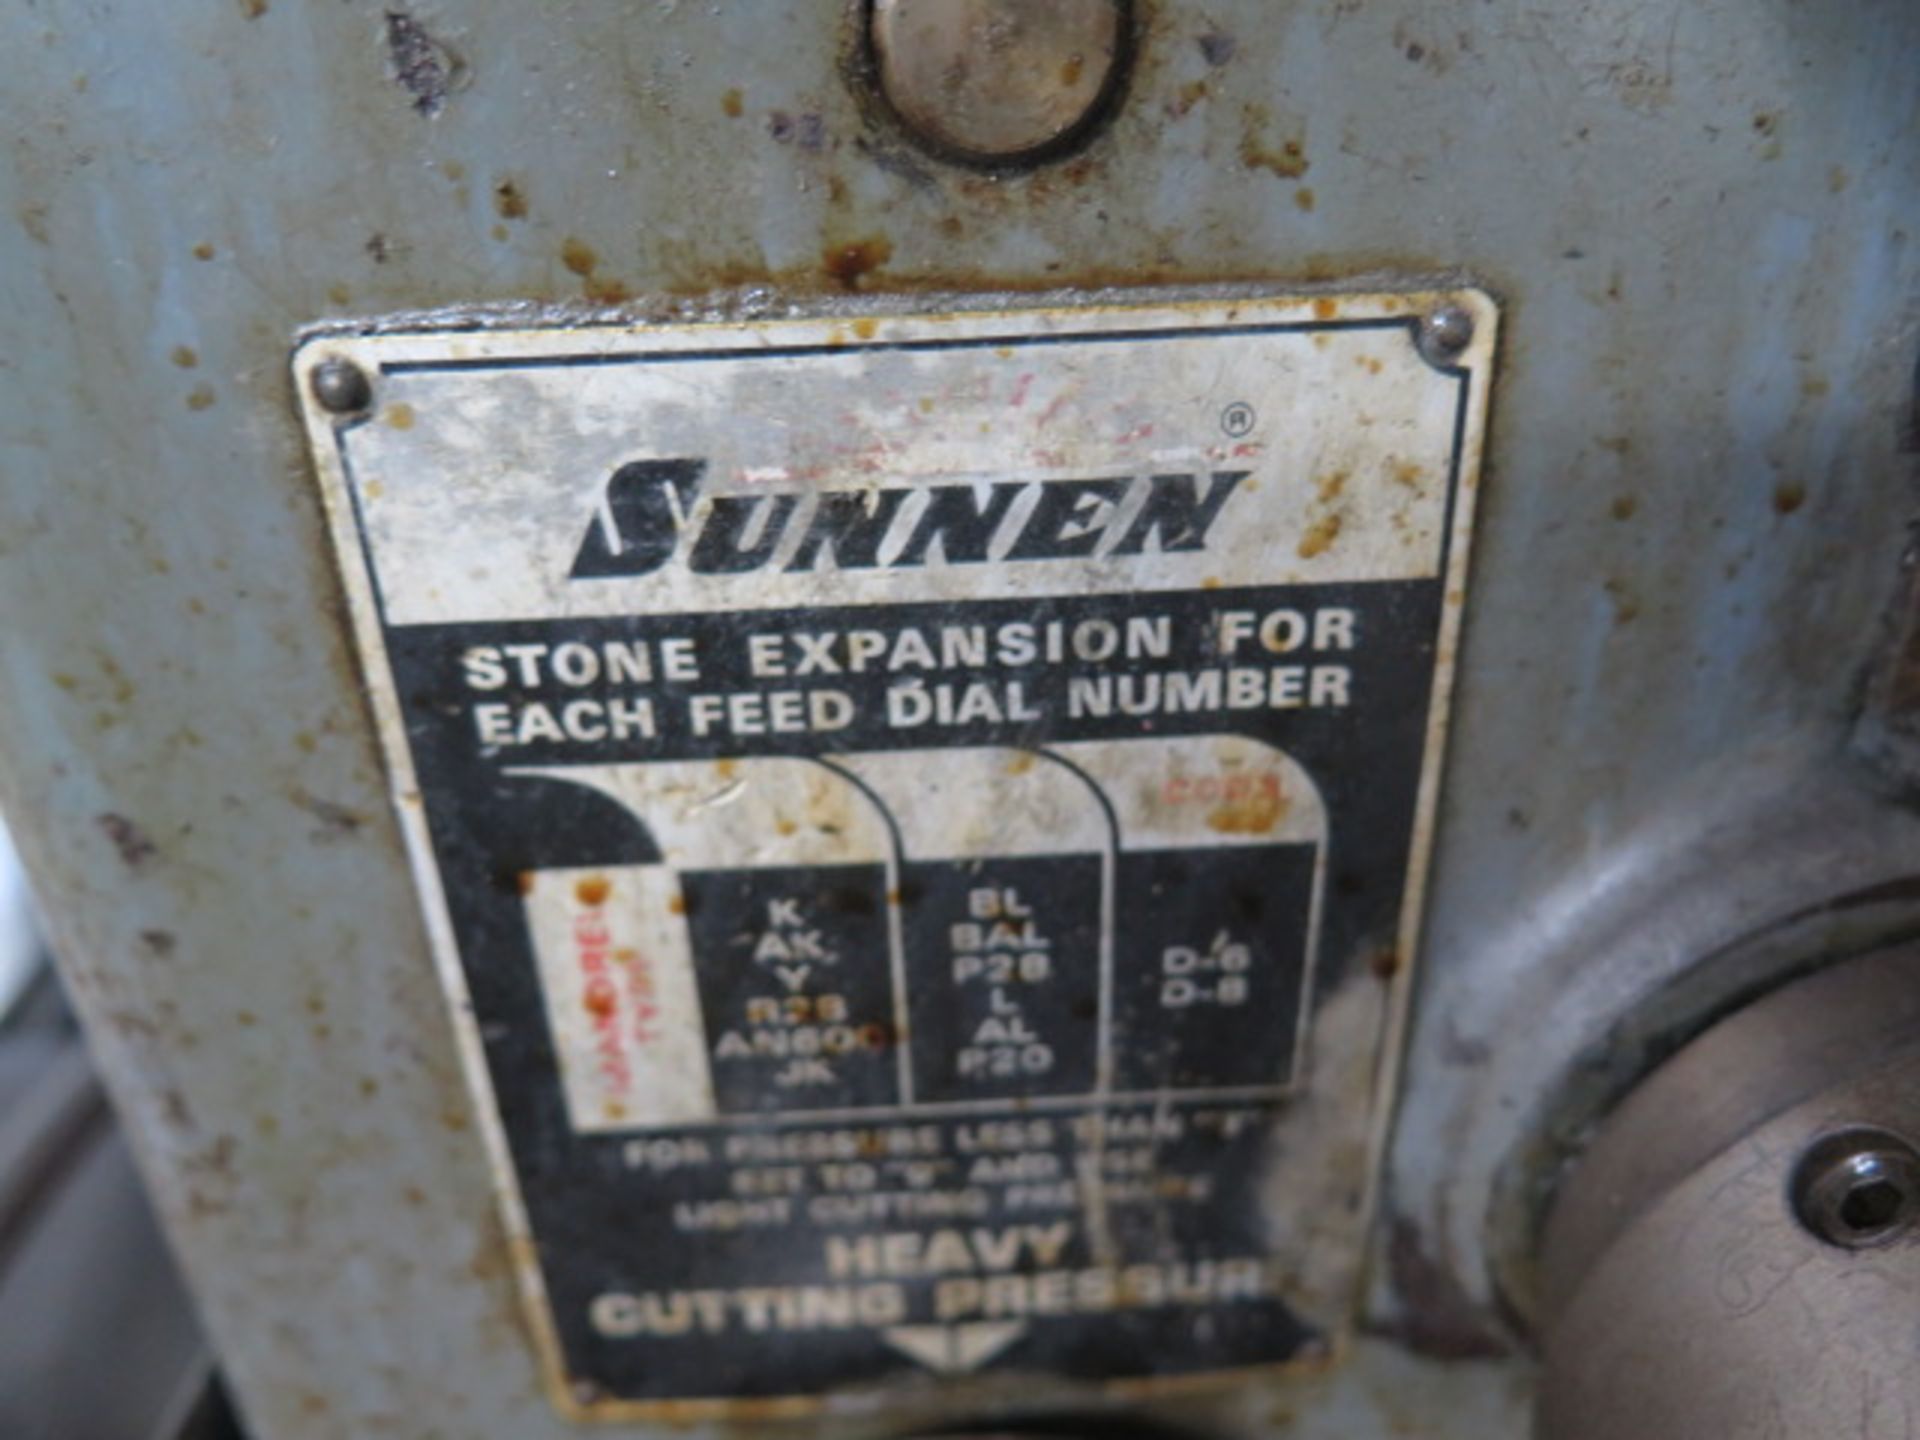 Sunnen MGG-1650 Precision Honing Machine s/n 50631 w/ 12-Speeds, Coolant (SOLD AS-IS - NO WARRANTY) - Image 3 of 6